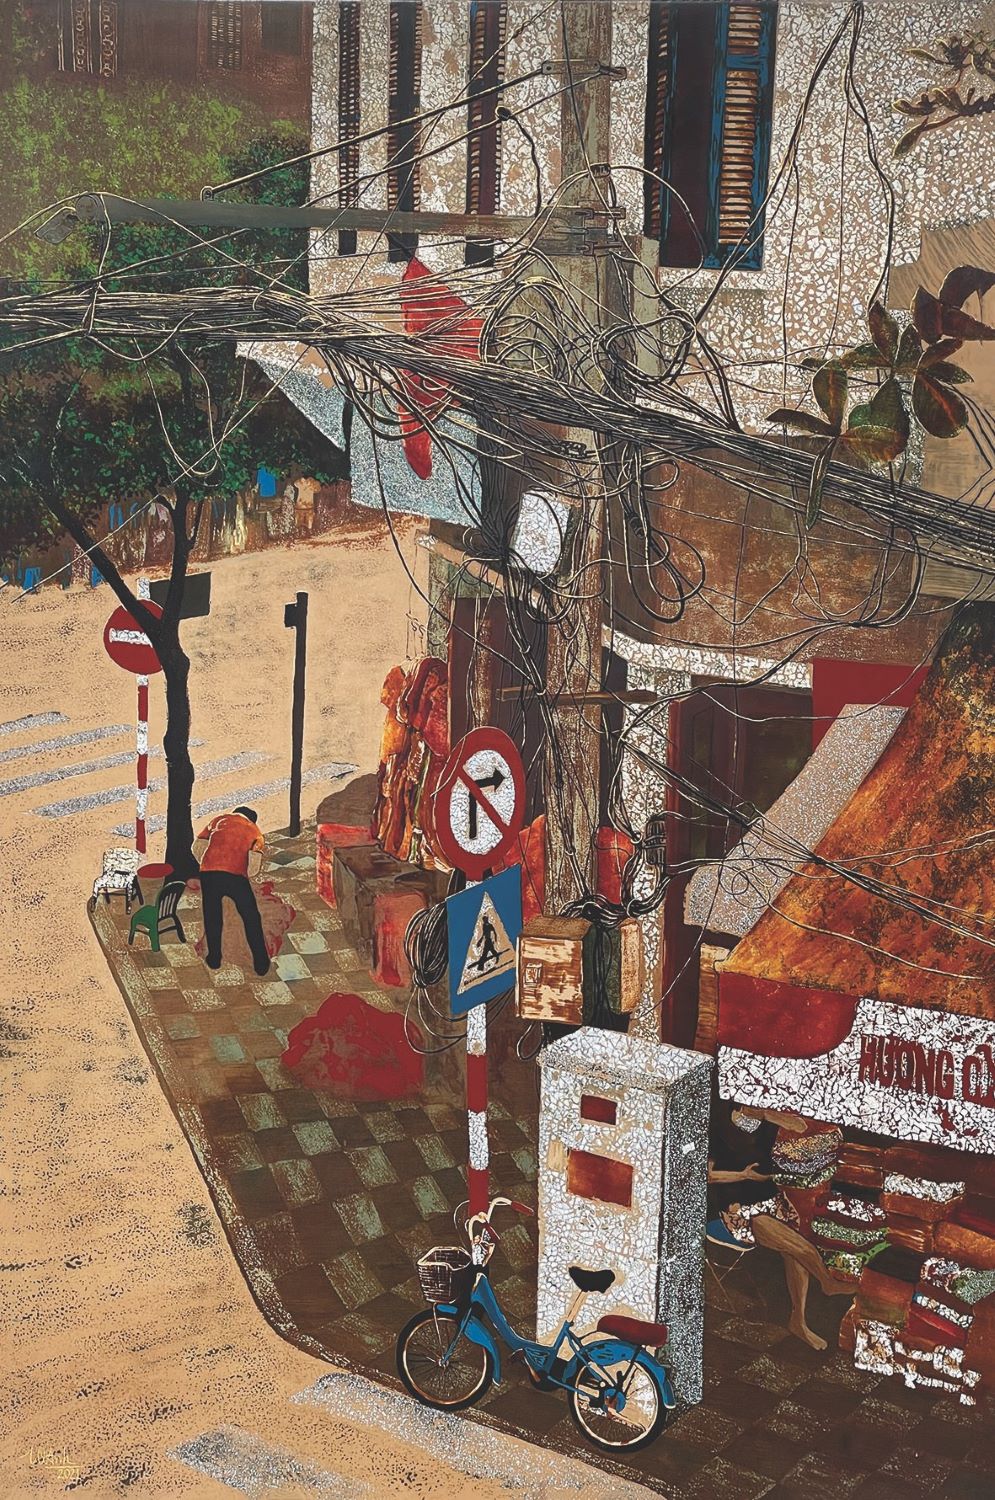 Crossroads - Vietnamese Lacquer Painting by Artist Trinh Que Anh